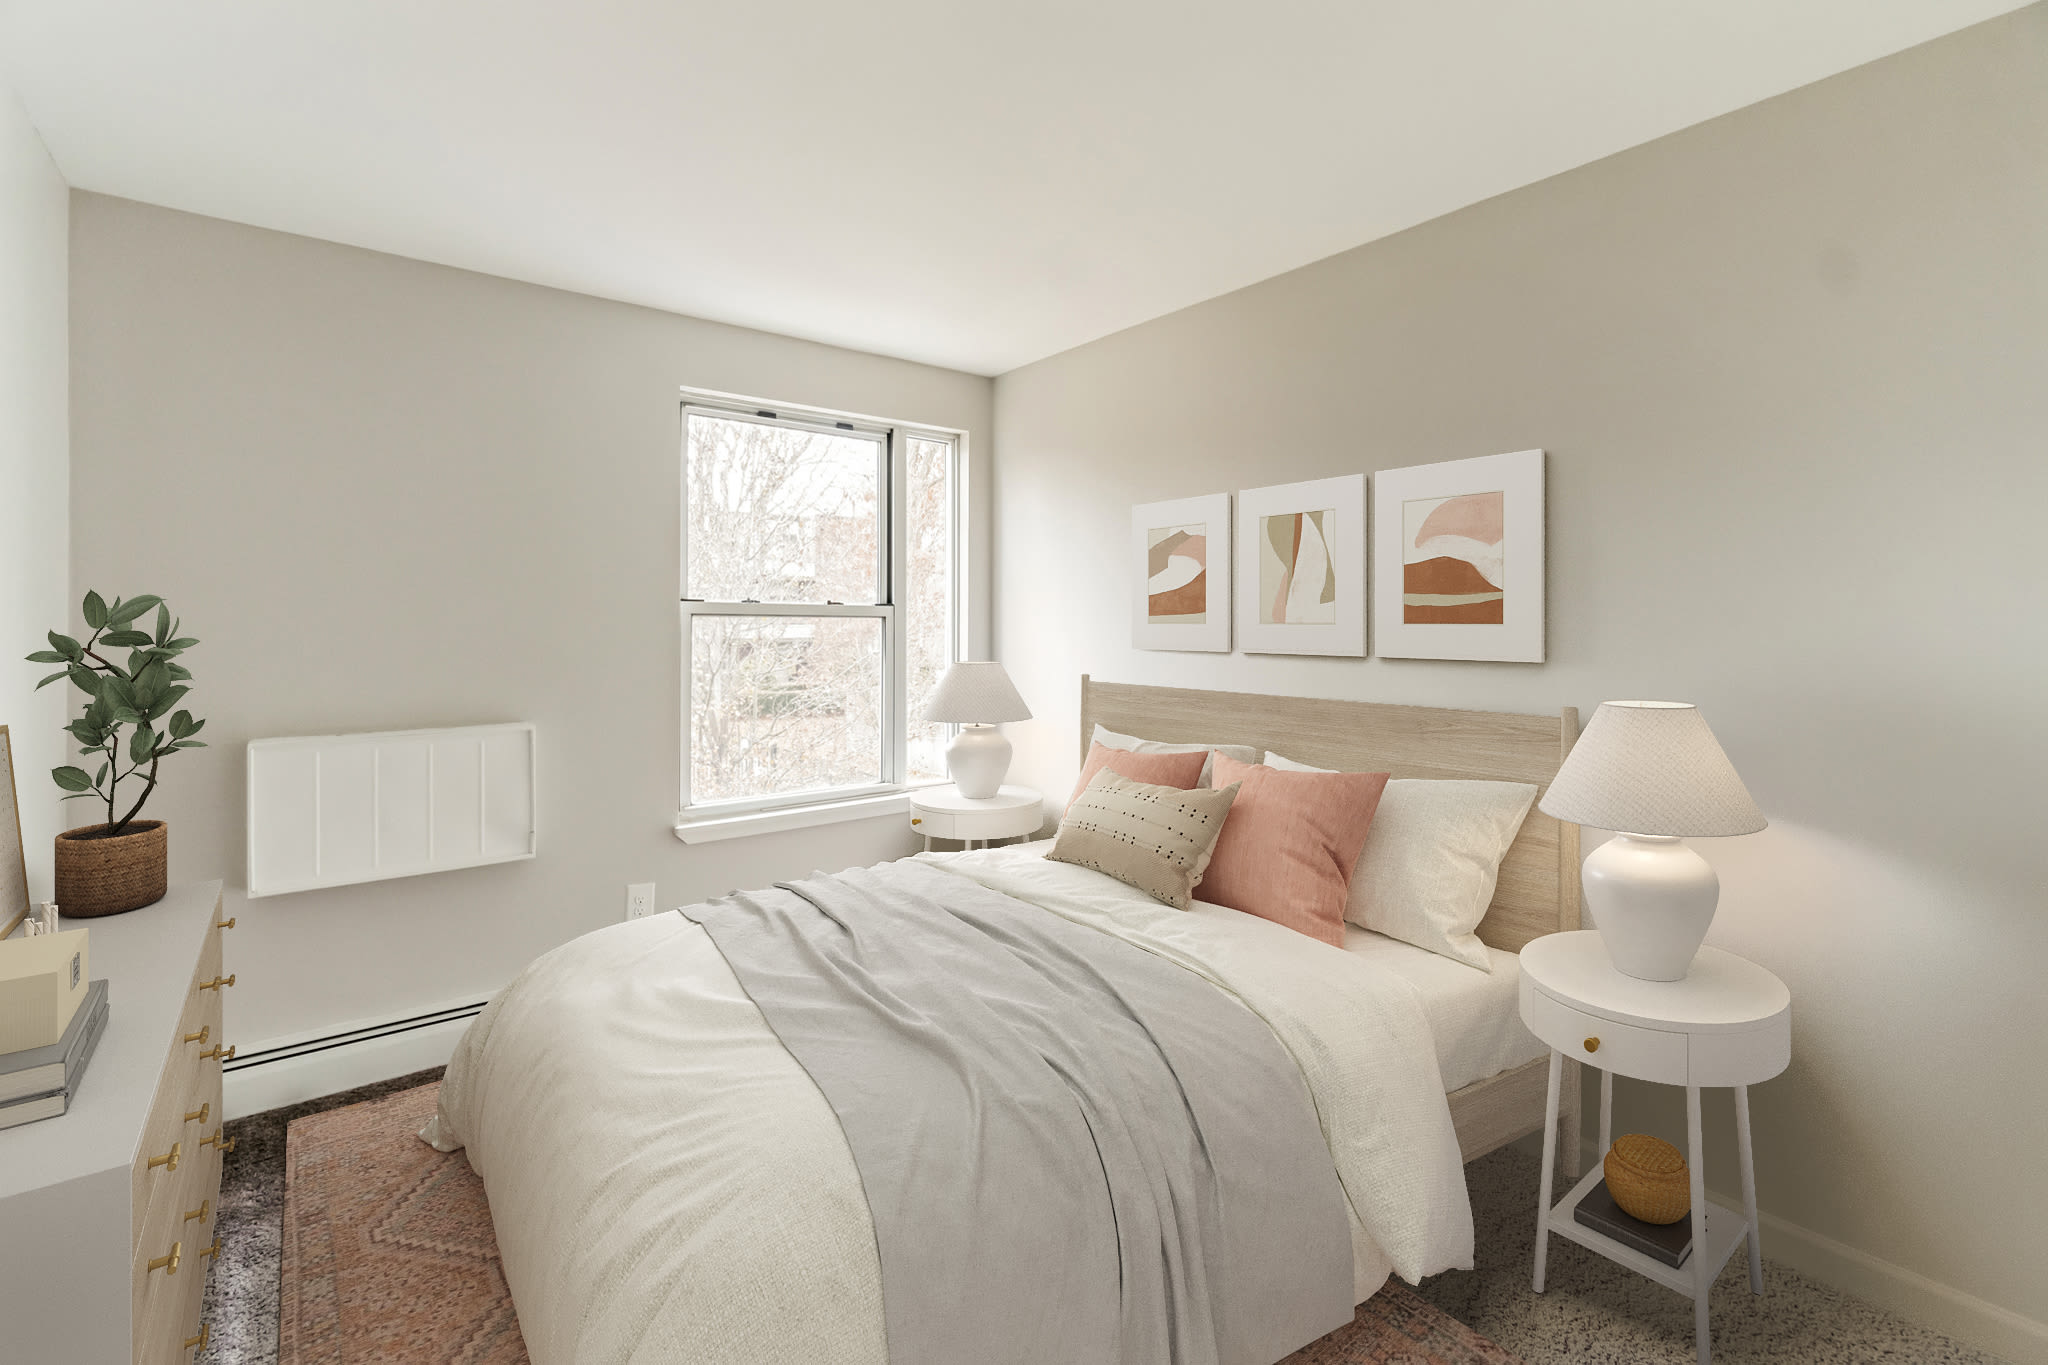 Bedroom at Eagle Rock Apartments & Townhomes at Brighton in Brighton, Massachusetts